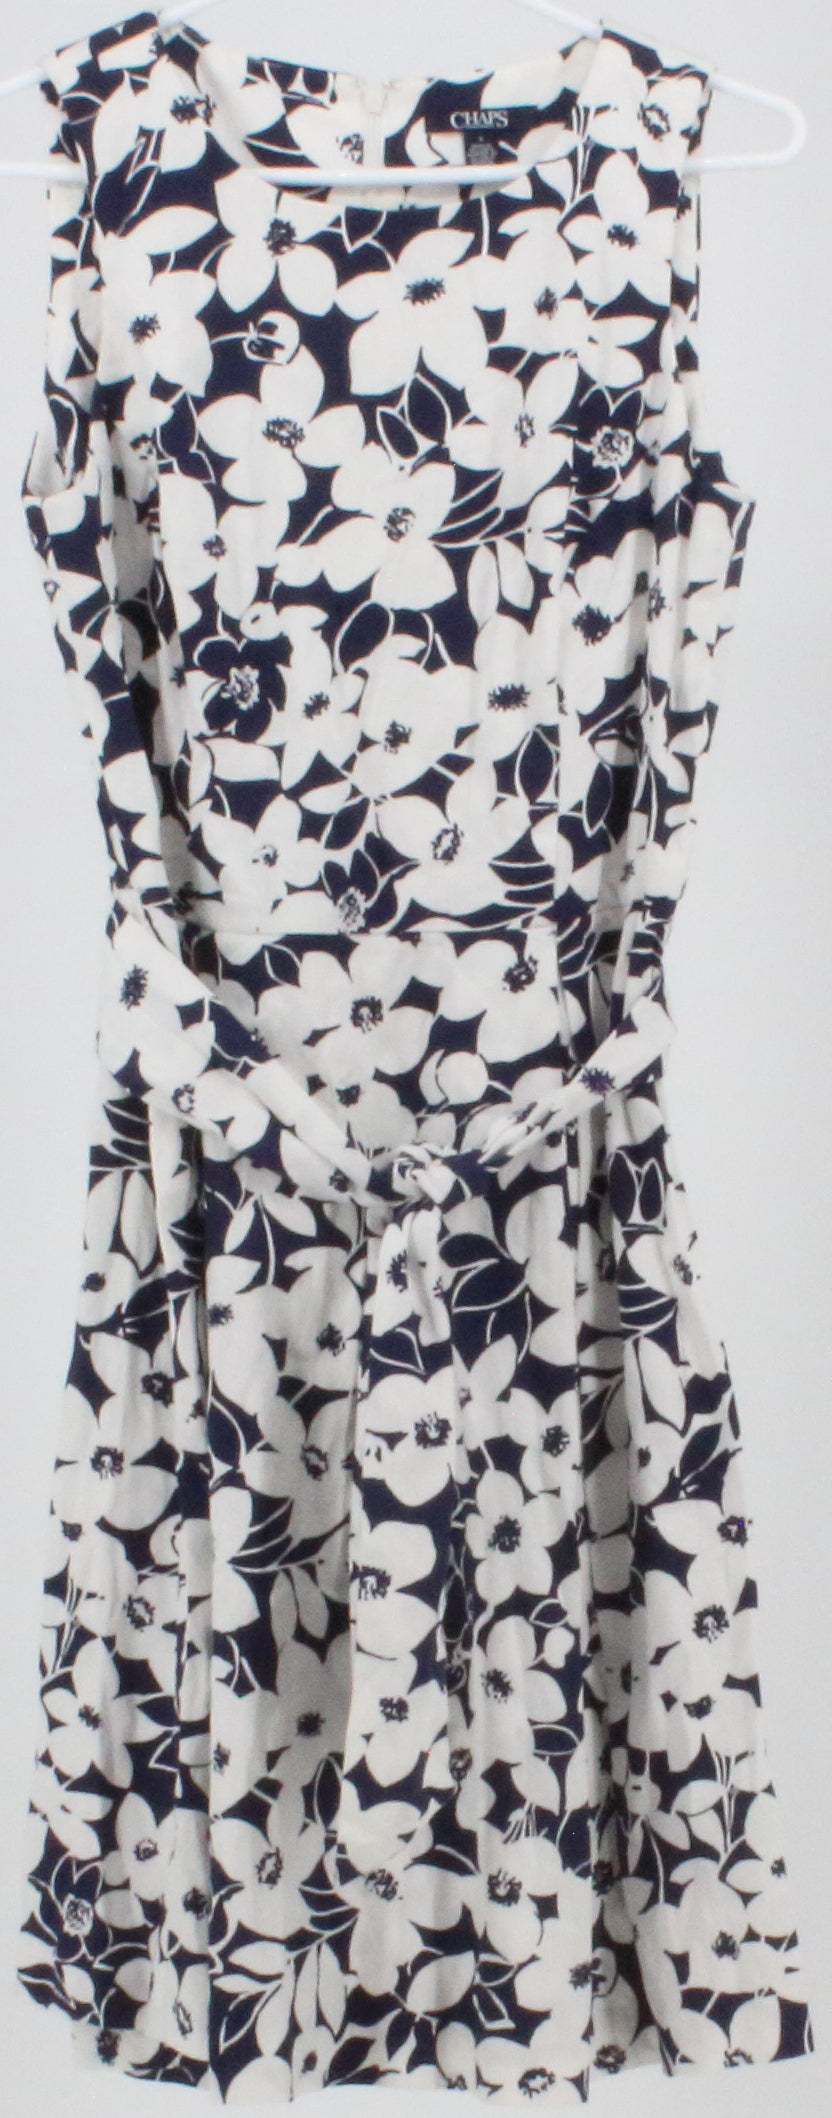 Chaps White and Navy Blue Flowers Print Dress